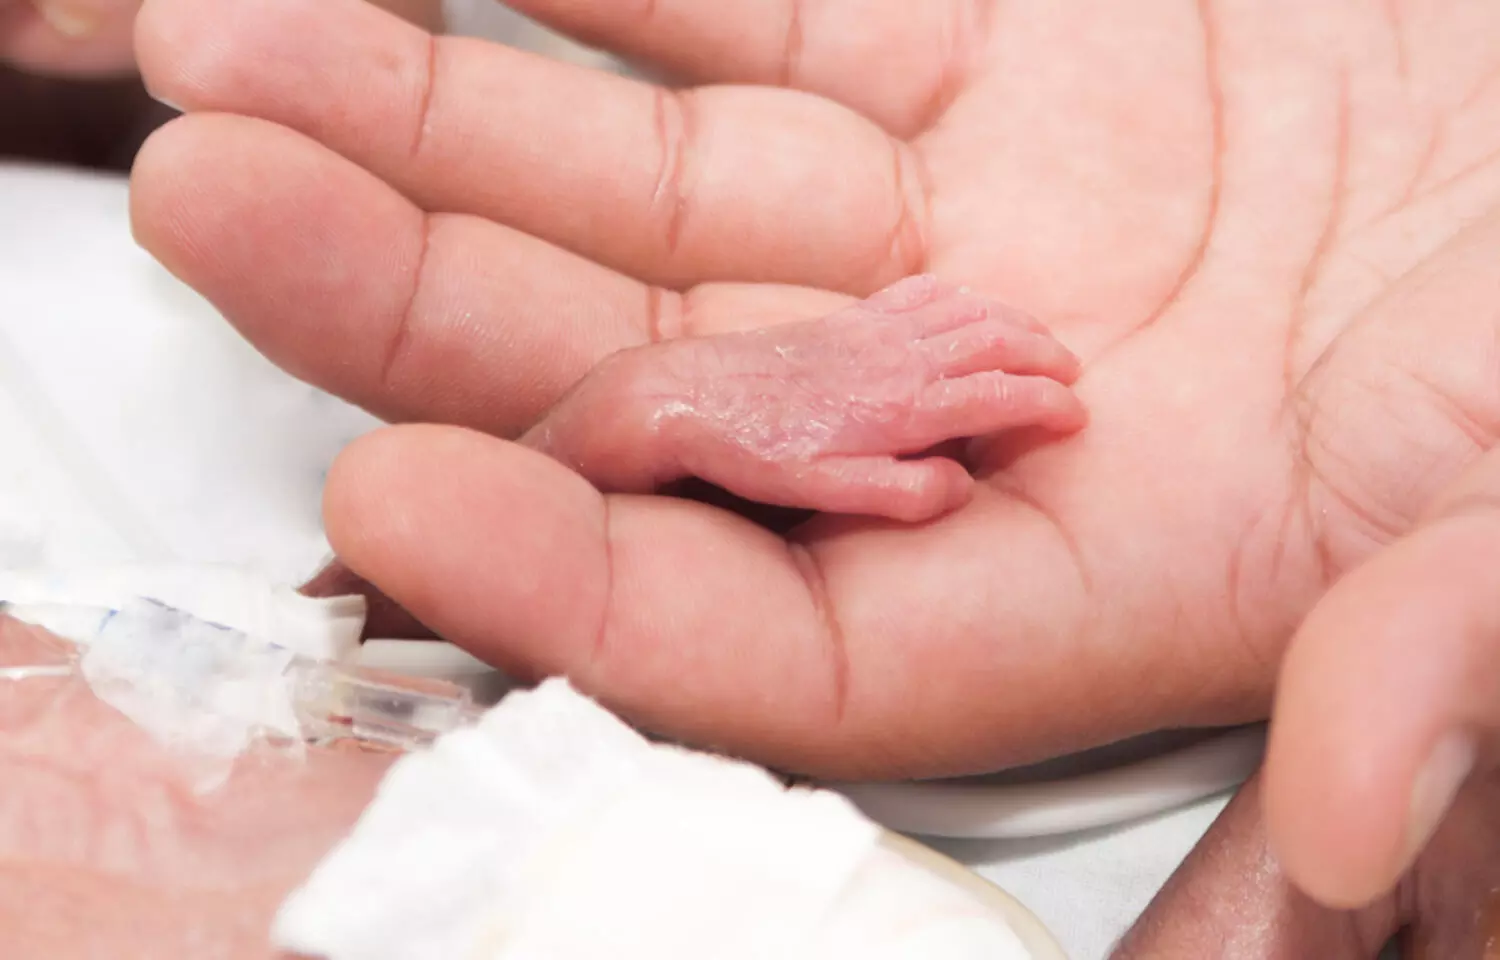 Glycerin suppositories and enemas tied to early meconium evacuation in premature infants: AAP